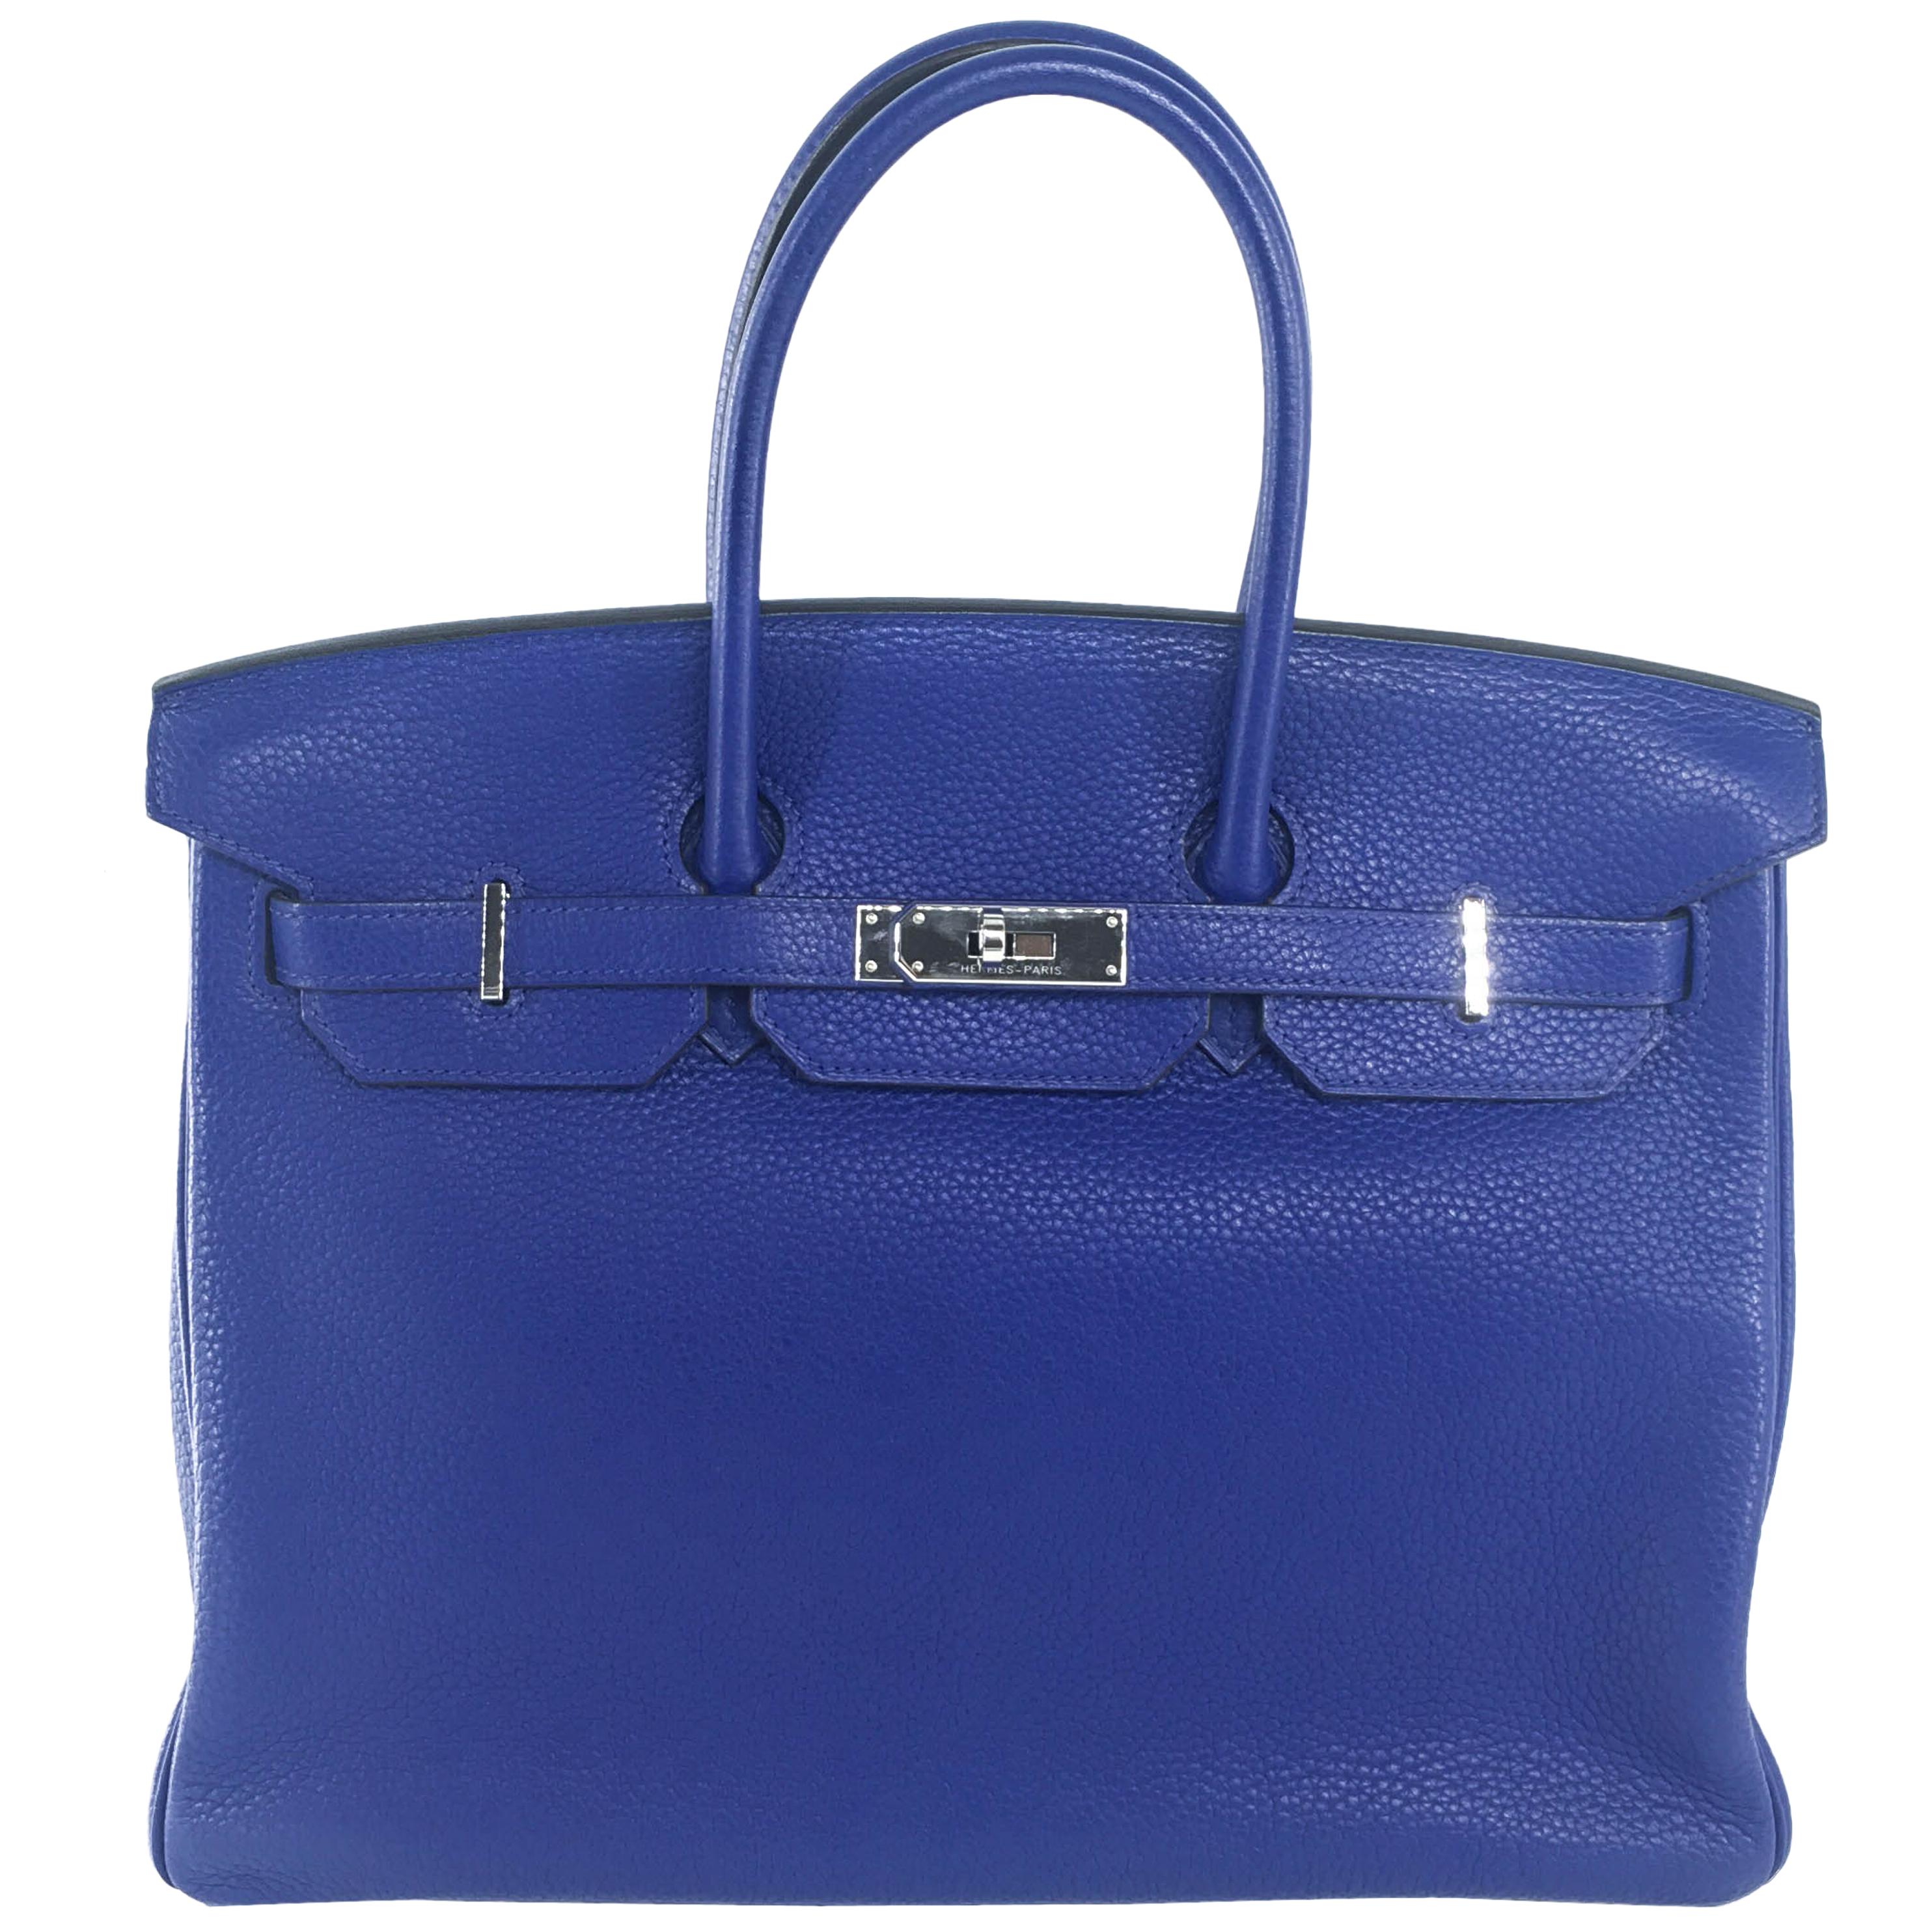 Hermes Birkin 35 Togo leather Blue Electric PHW For Sale